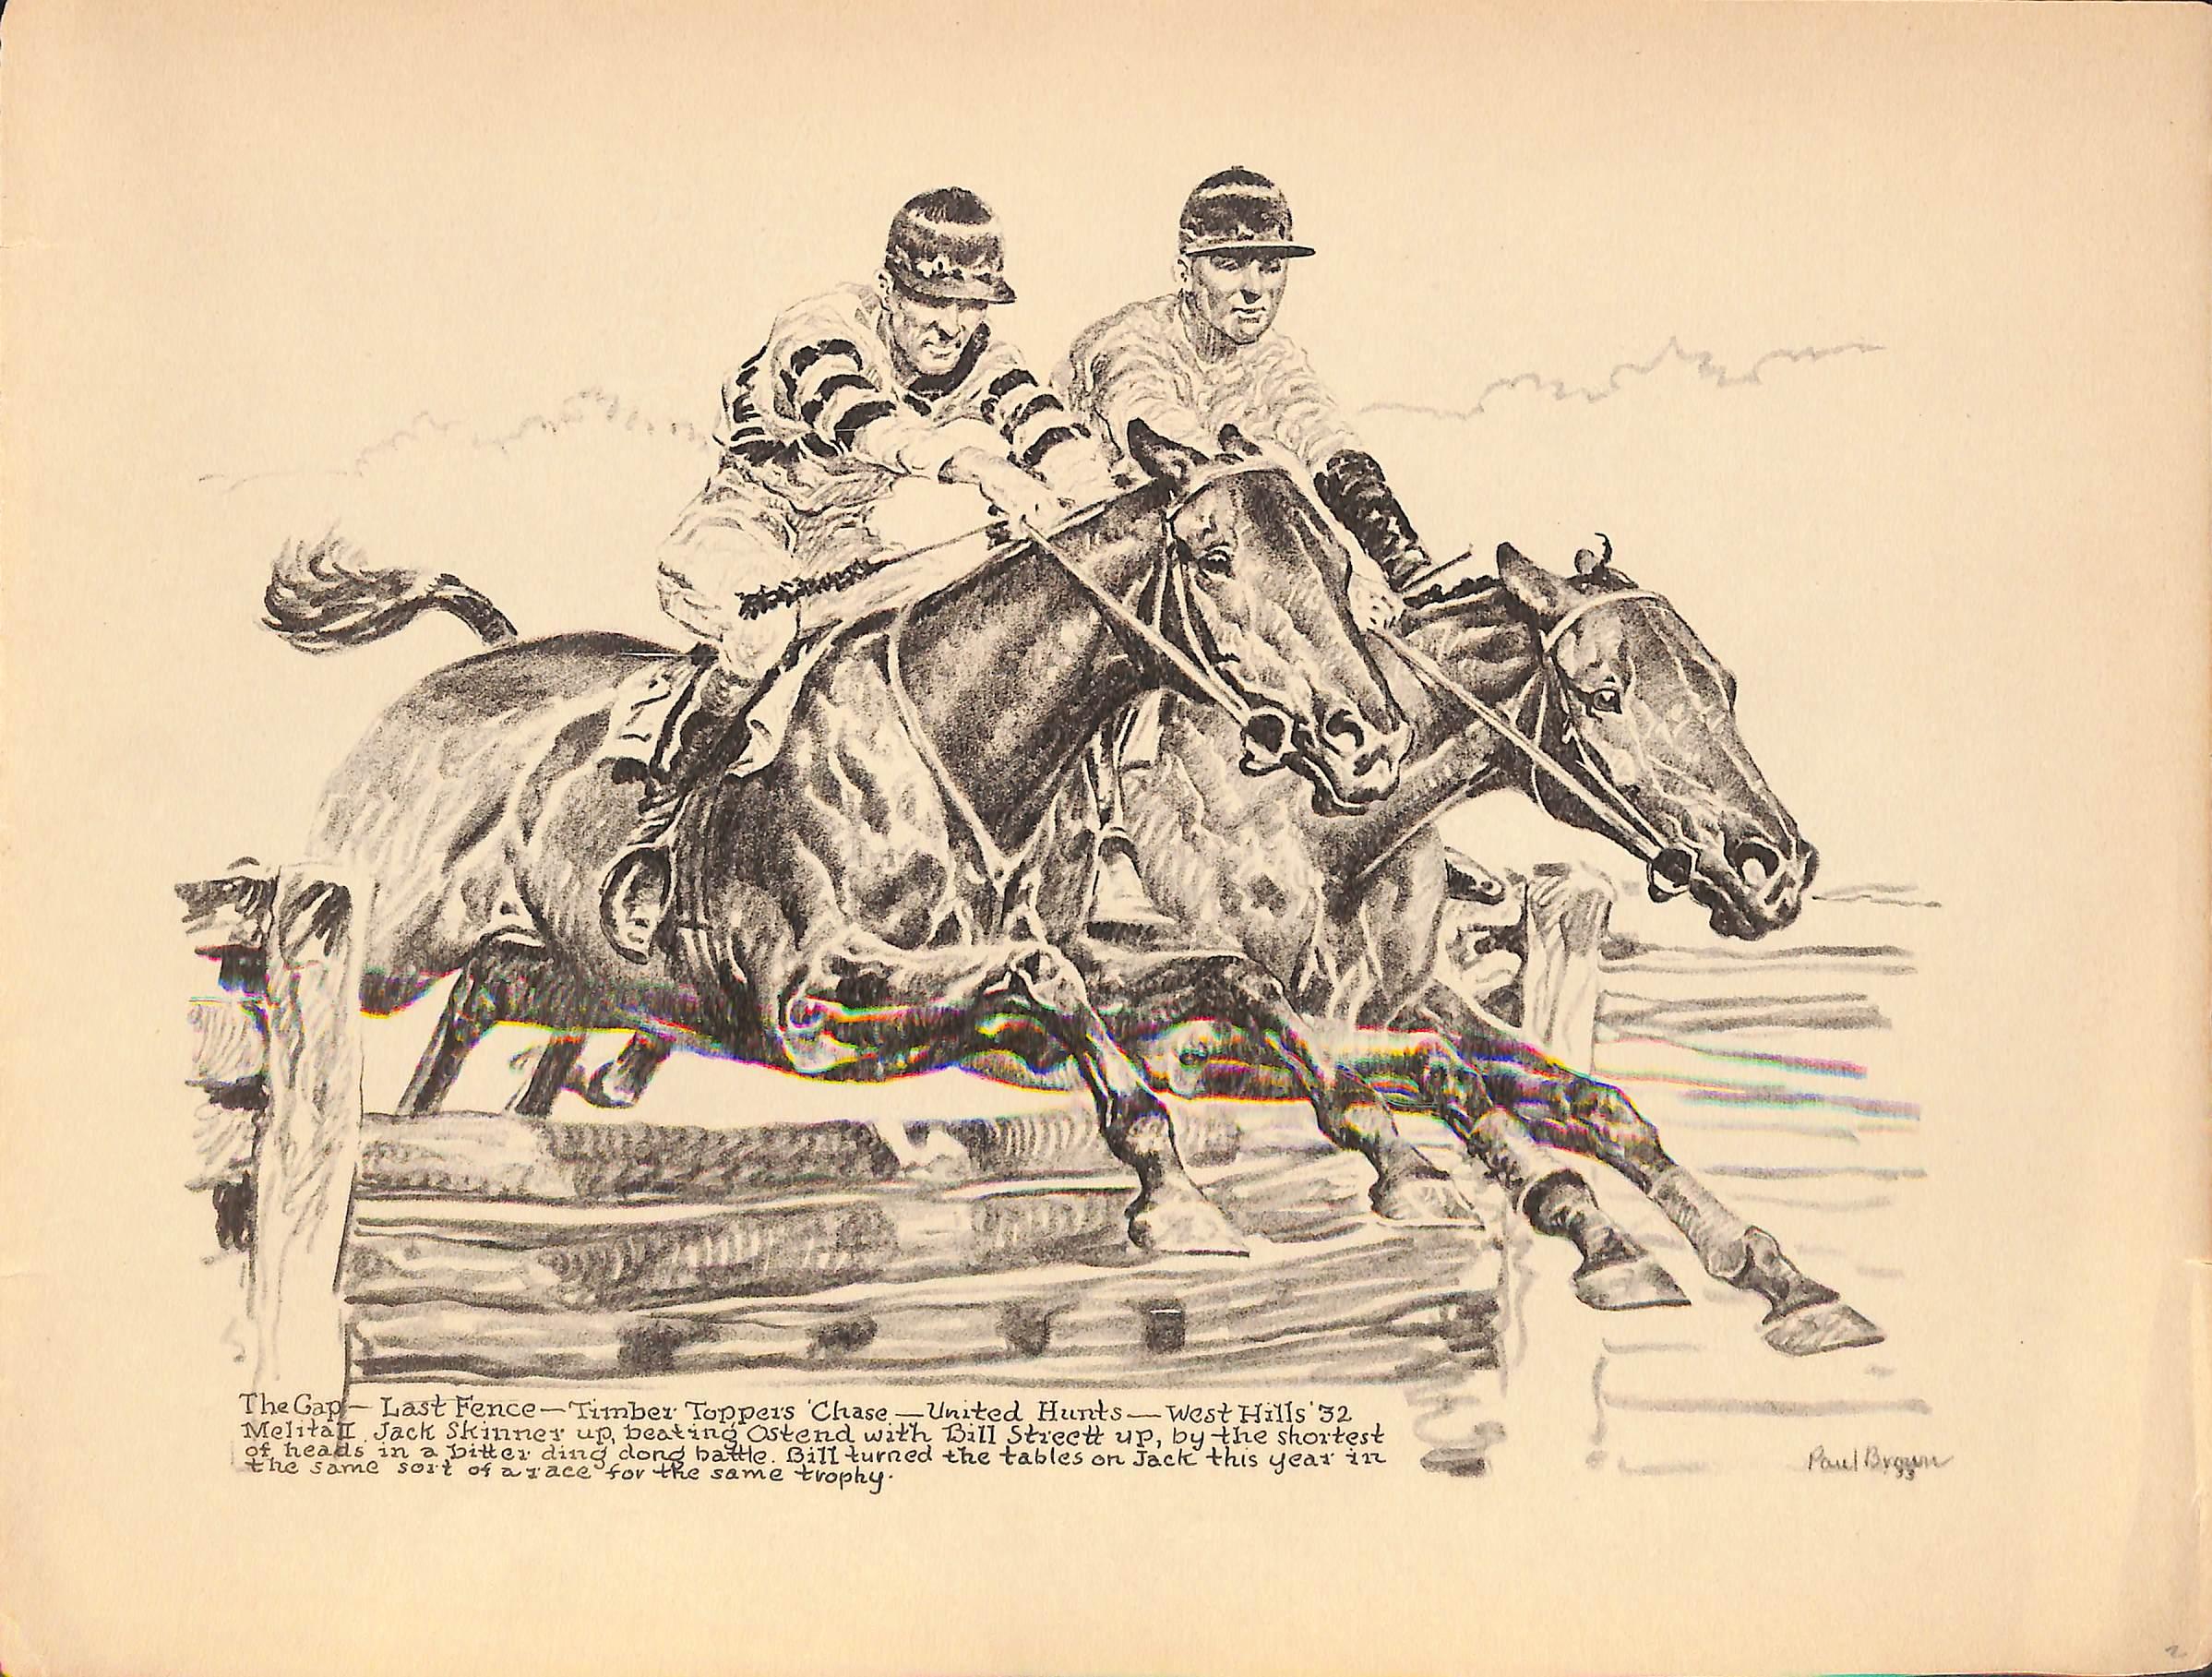 The Gap - Last Fence - Timber Toppers Chase - Art by Paul Desmond Brown